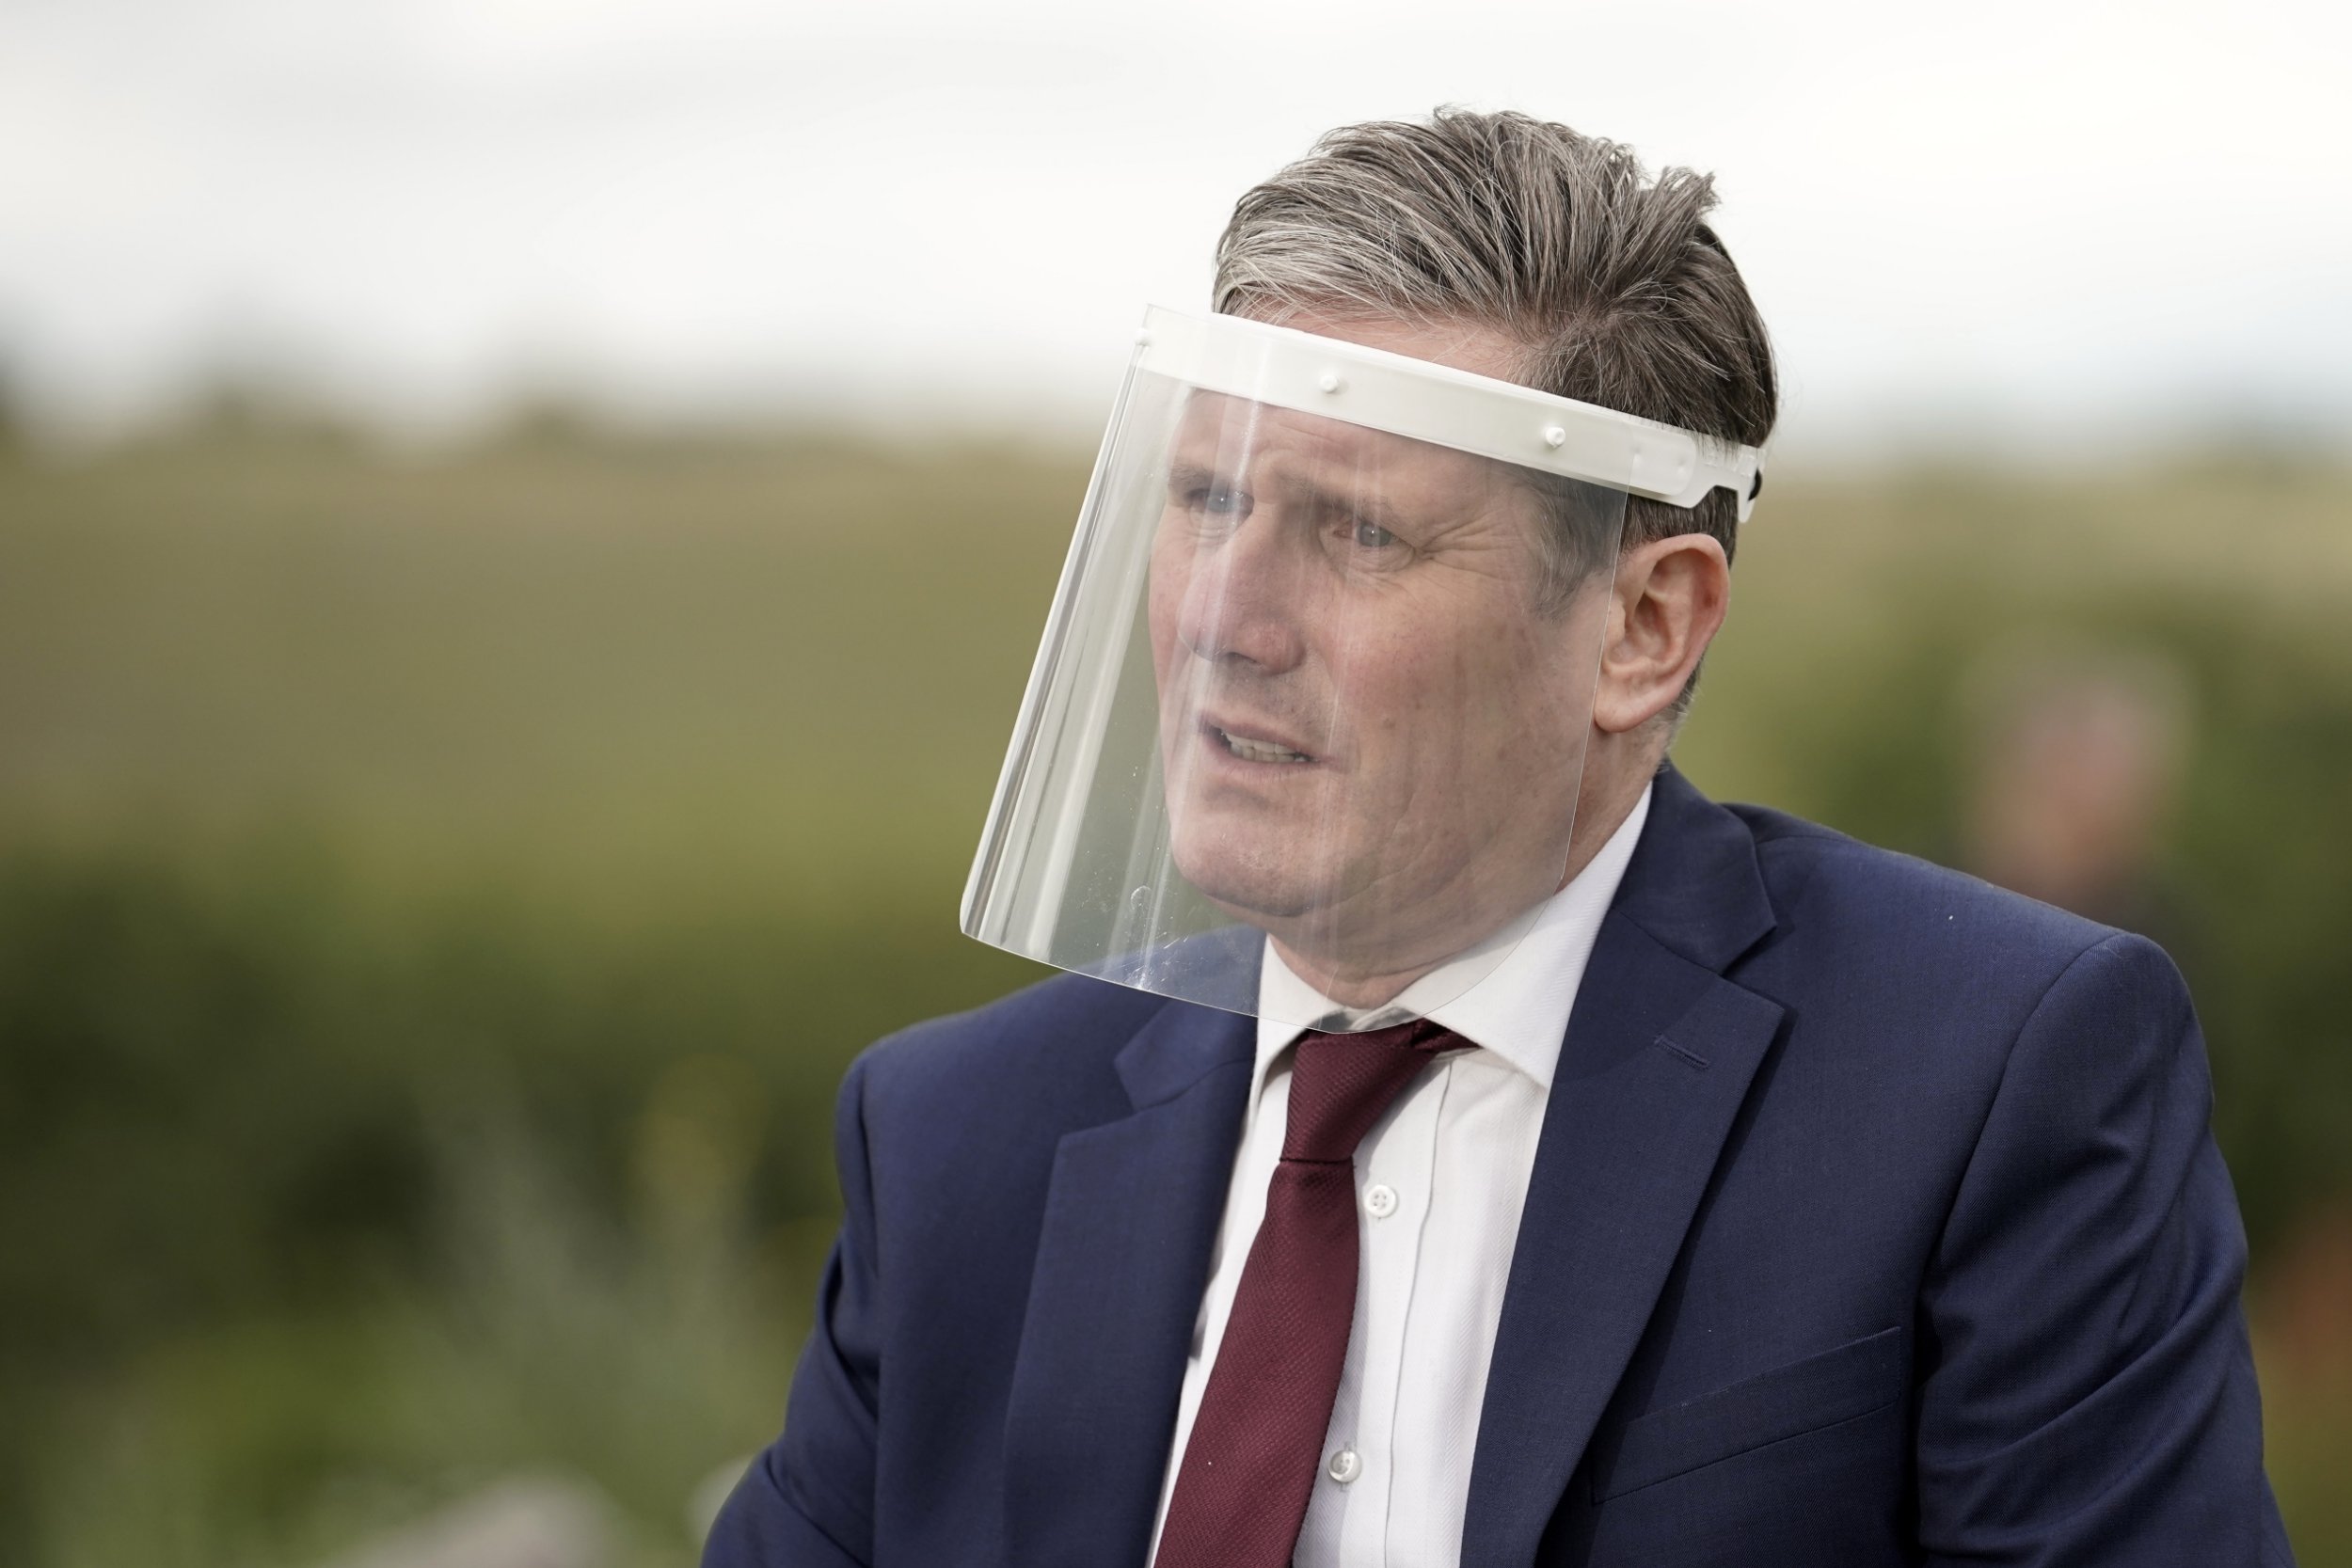 NOTTINGHAM, ENGLAND - JULY 16: Labour Party leader, Sir Keir Starmer, wears a face visor during talks with care home workers and family members of residents during a visit to Cafe 1899 in Gedling Country Park on July 16, 2020 in Nottingham, England. The opposition leader discussed the impact of coronavirus on care homes and the improvements needed ahead of a possible second wave this winter. Care homes for senior citizens in  the UK has seen thousands of deaths due to the Covid-19 pandemic.  (Photo by Christopher Furlong/Getty Images)